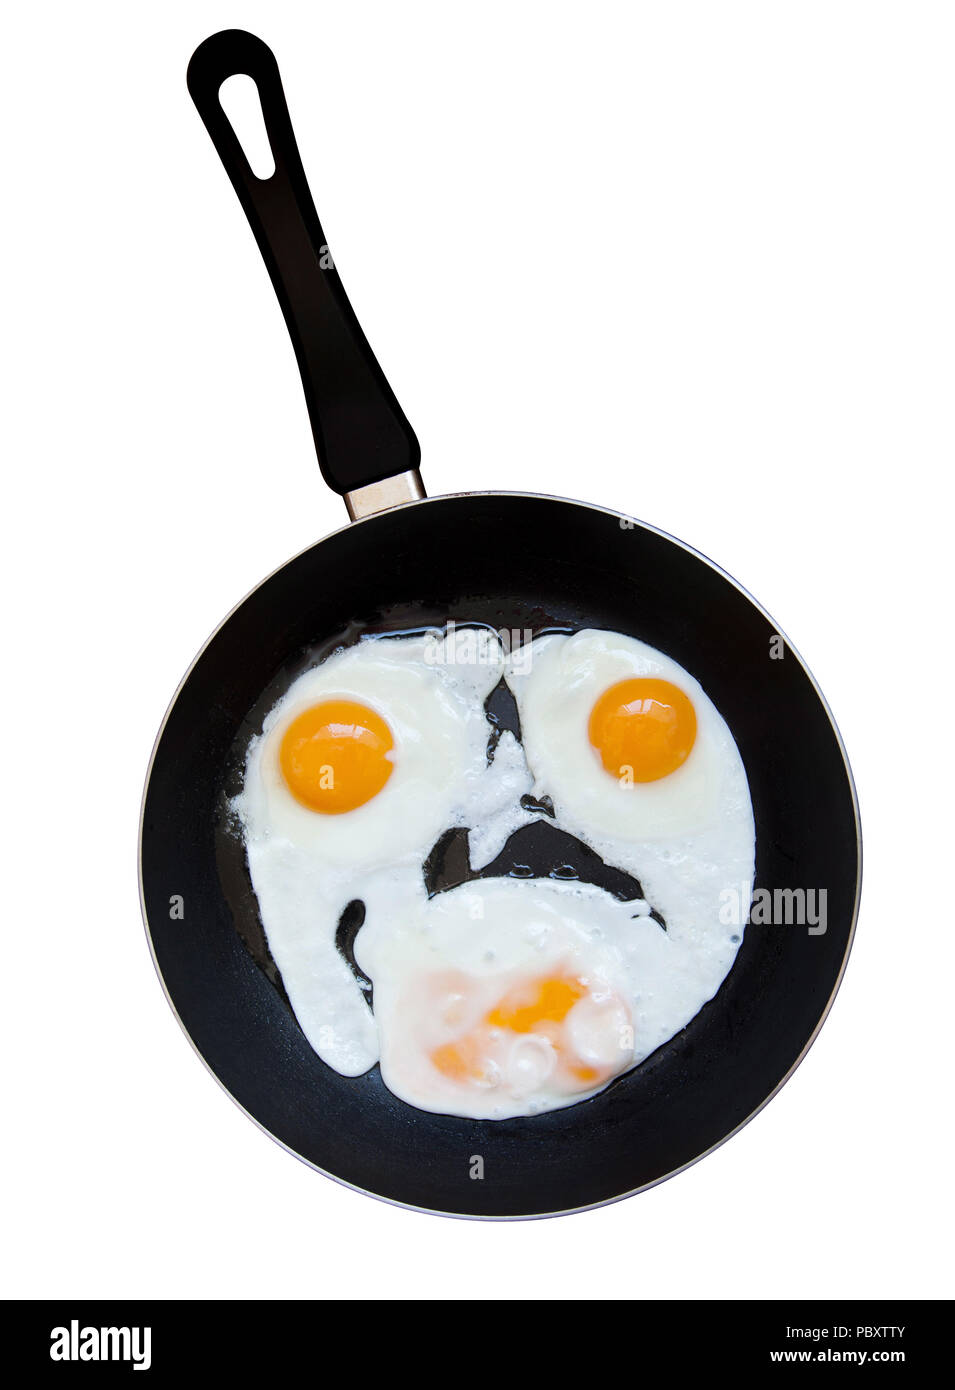 Eggs fried on a pan as a smile. Isolated on a white background with path. Stock Photo